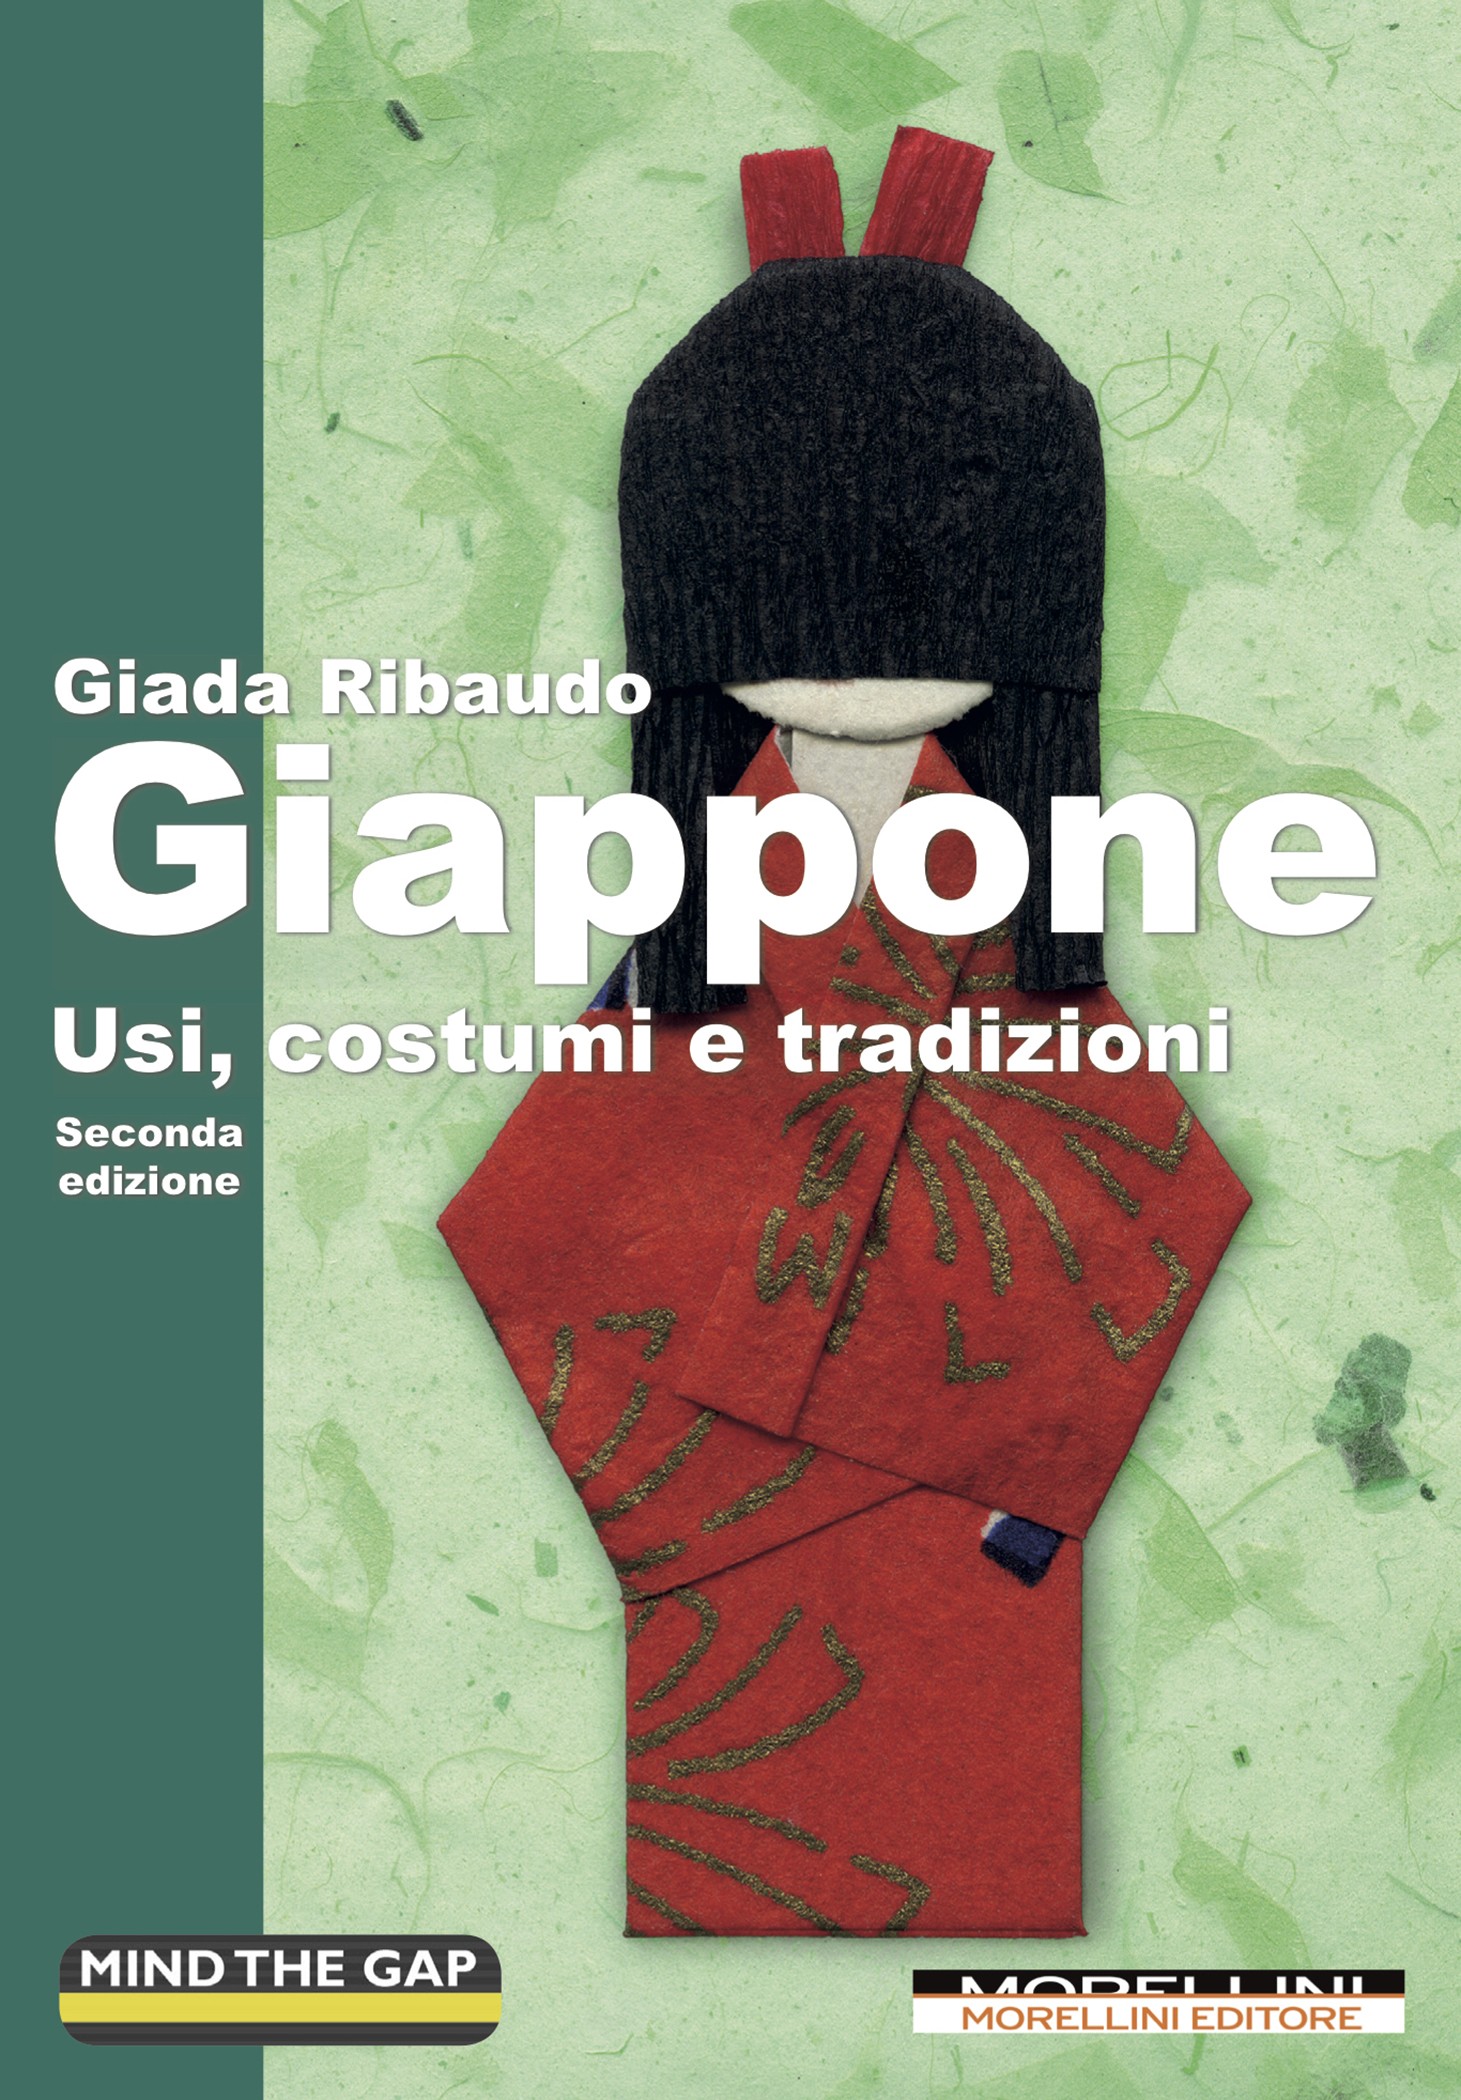 Giappone - Librerie.coop